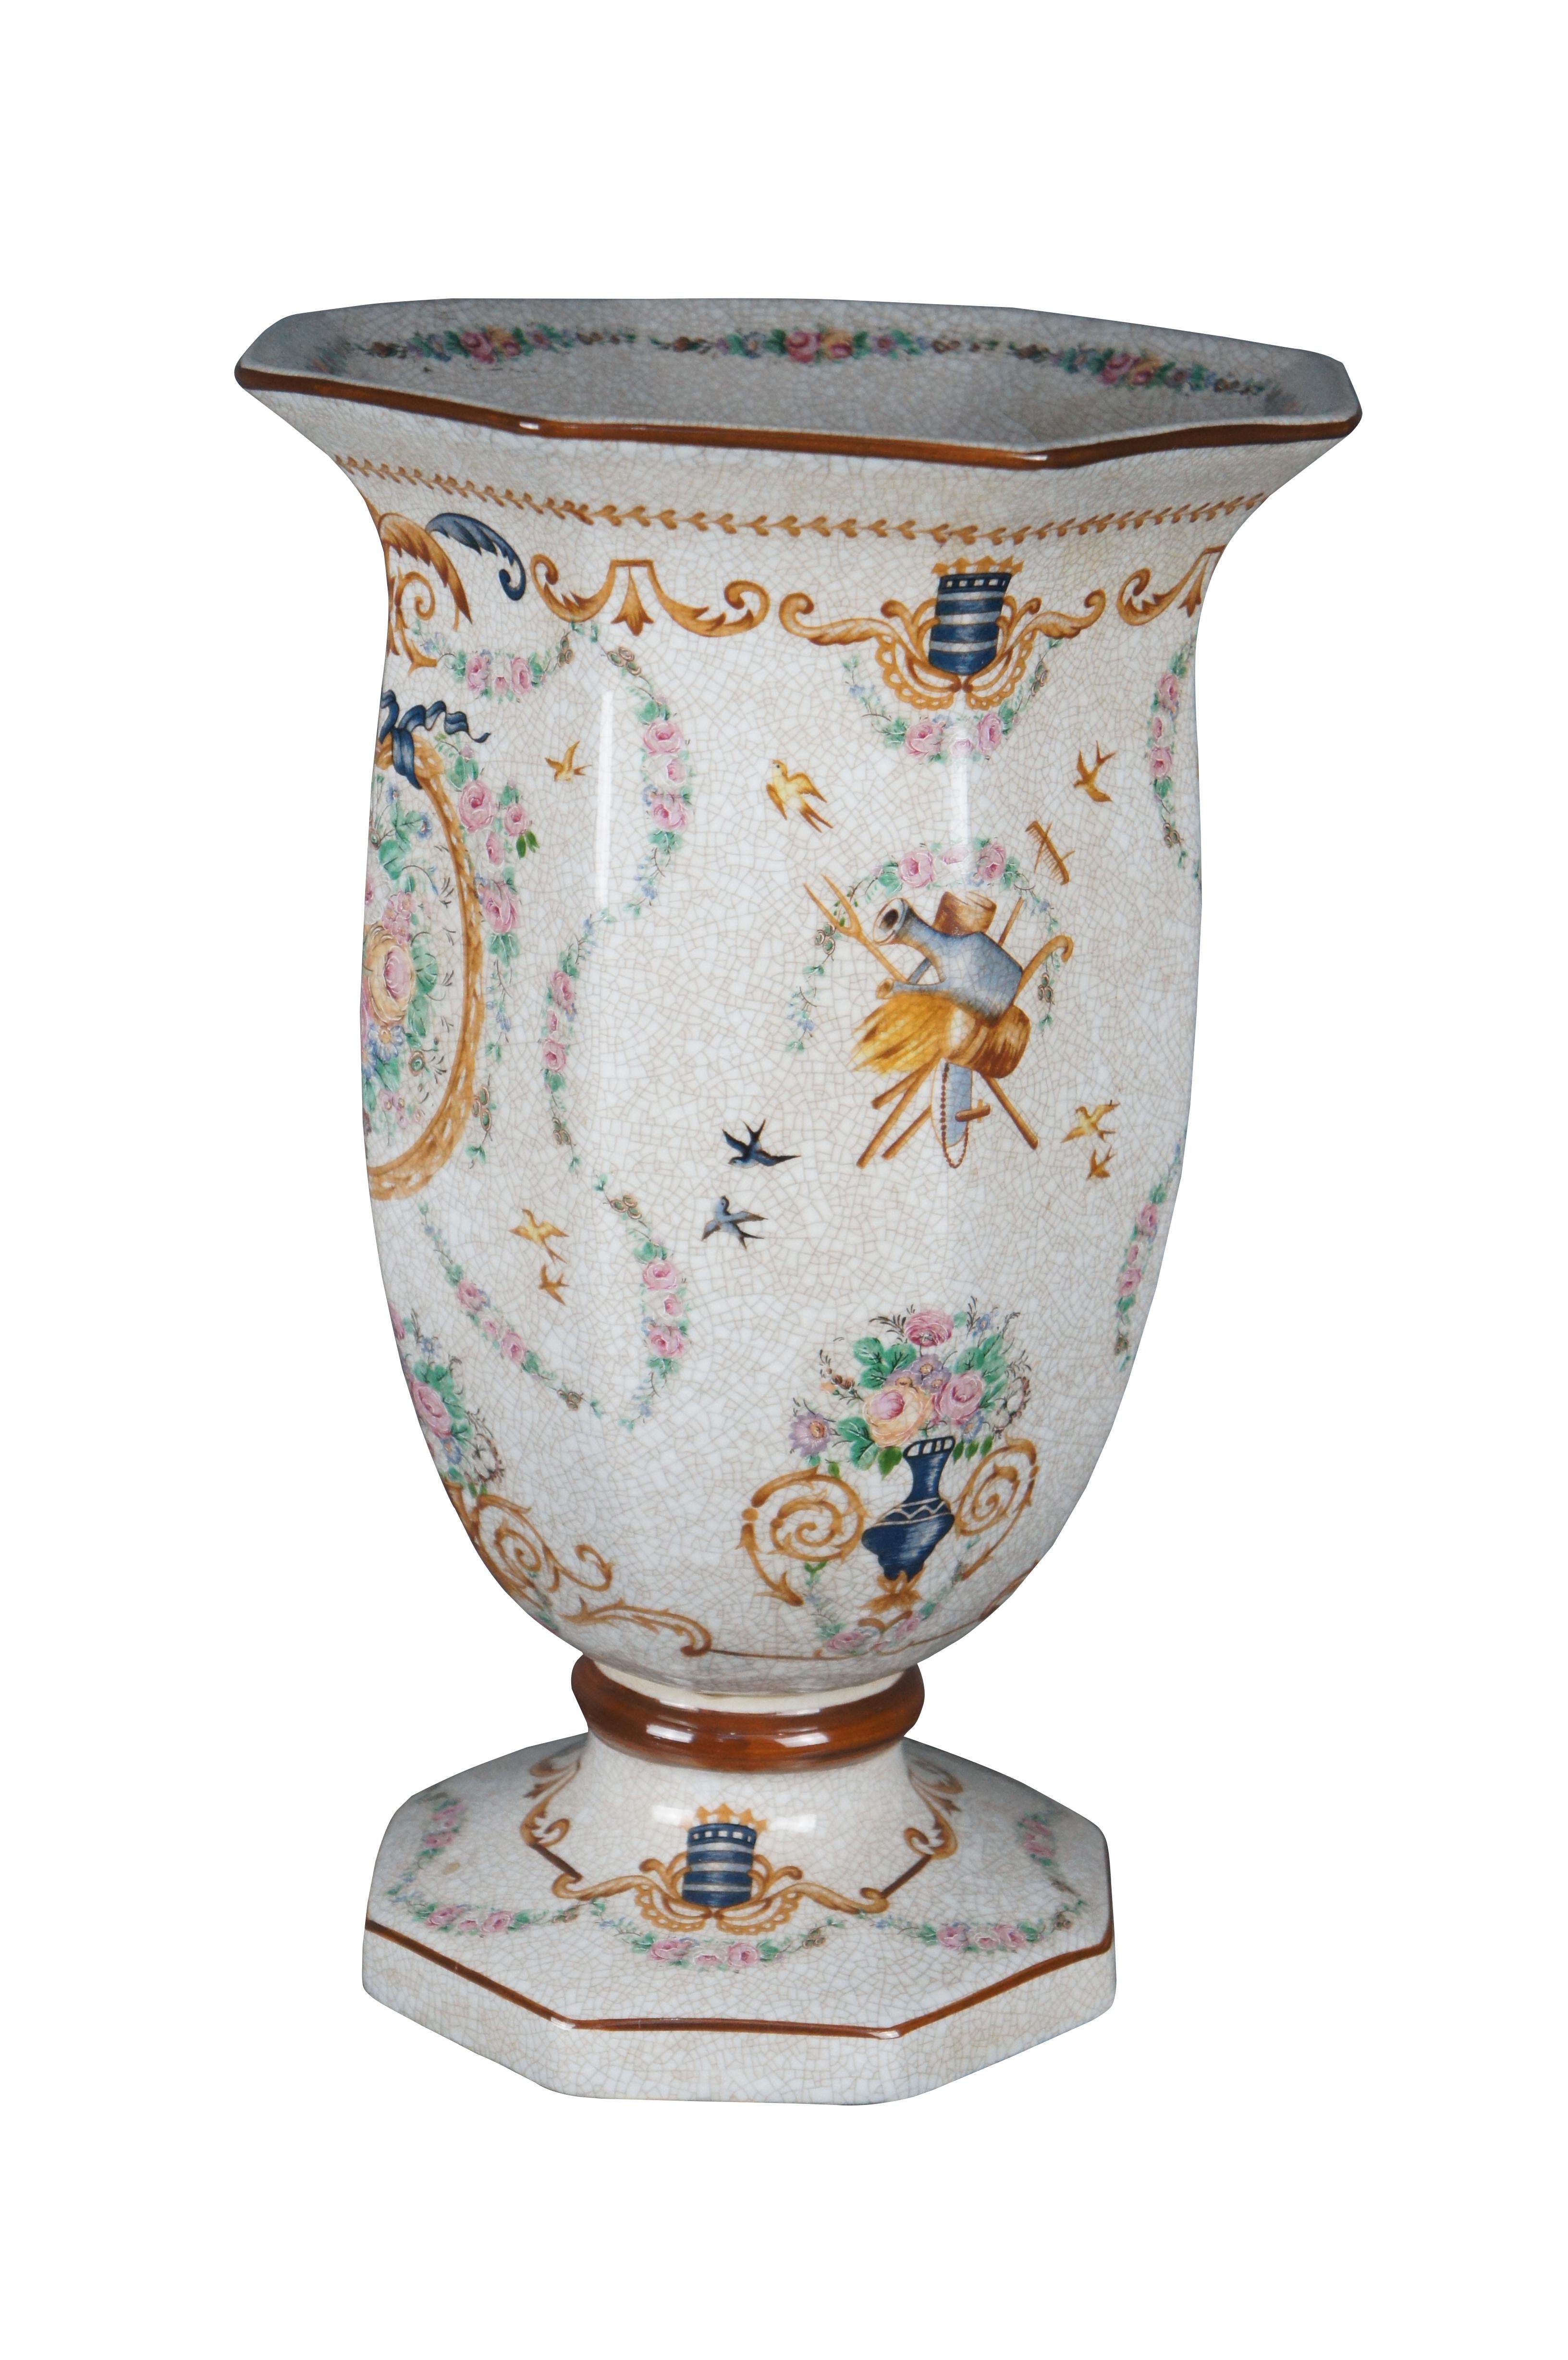 Chinoiserie Chinese Armorial Porcelain Polychrome Footed Flower Vase Urn Neoclassical 15